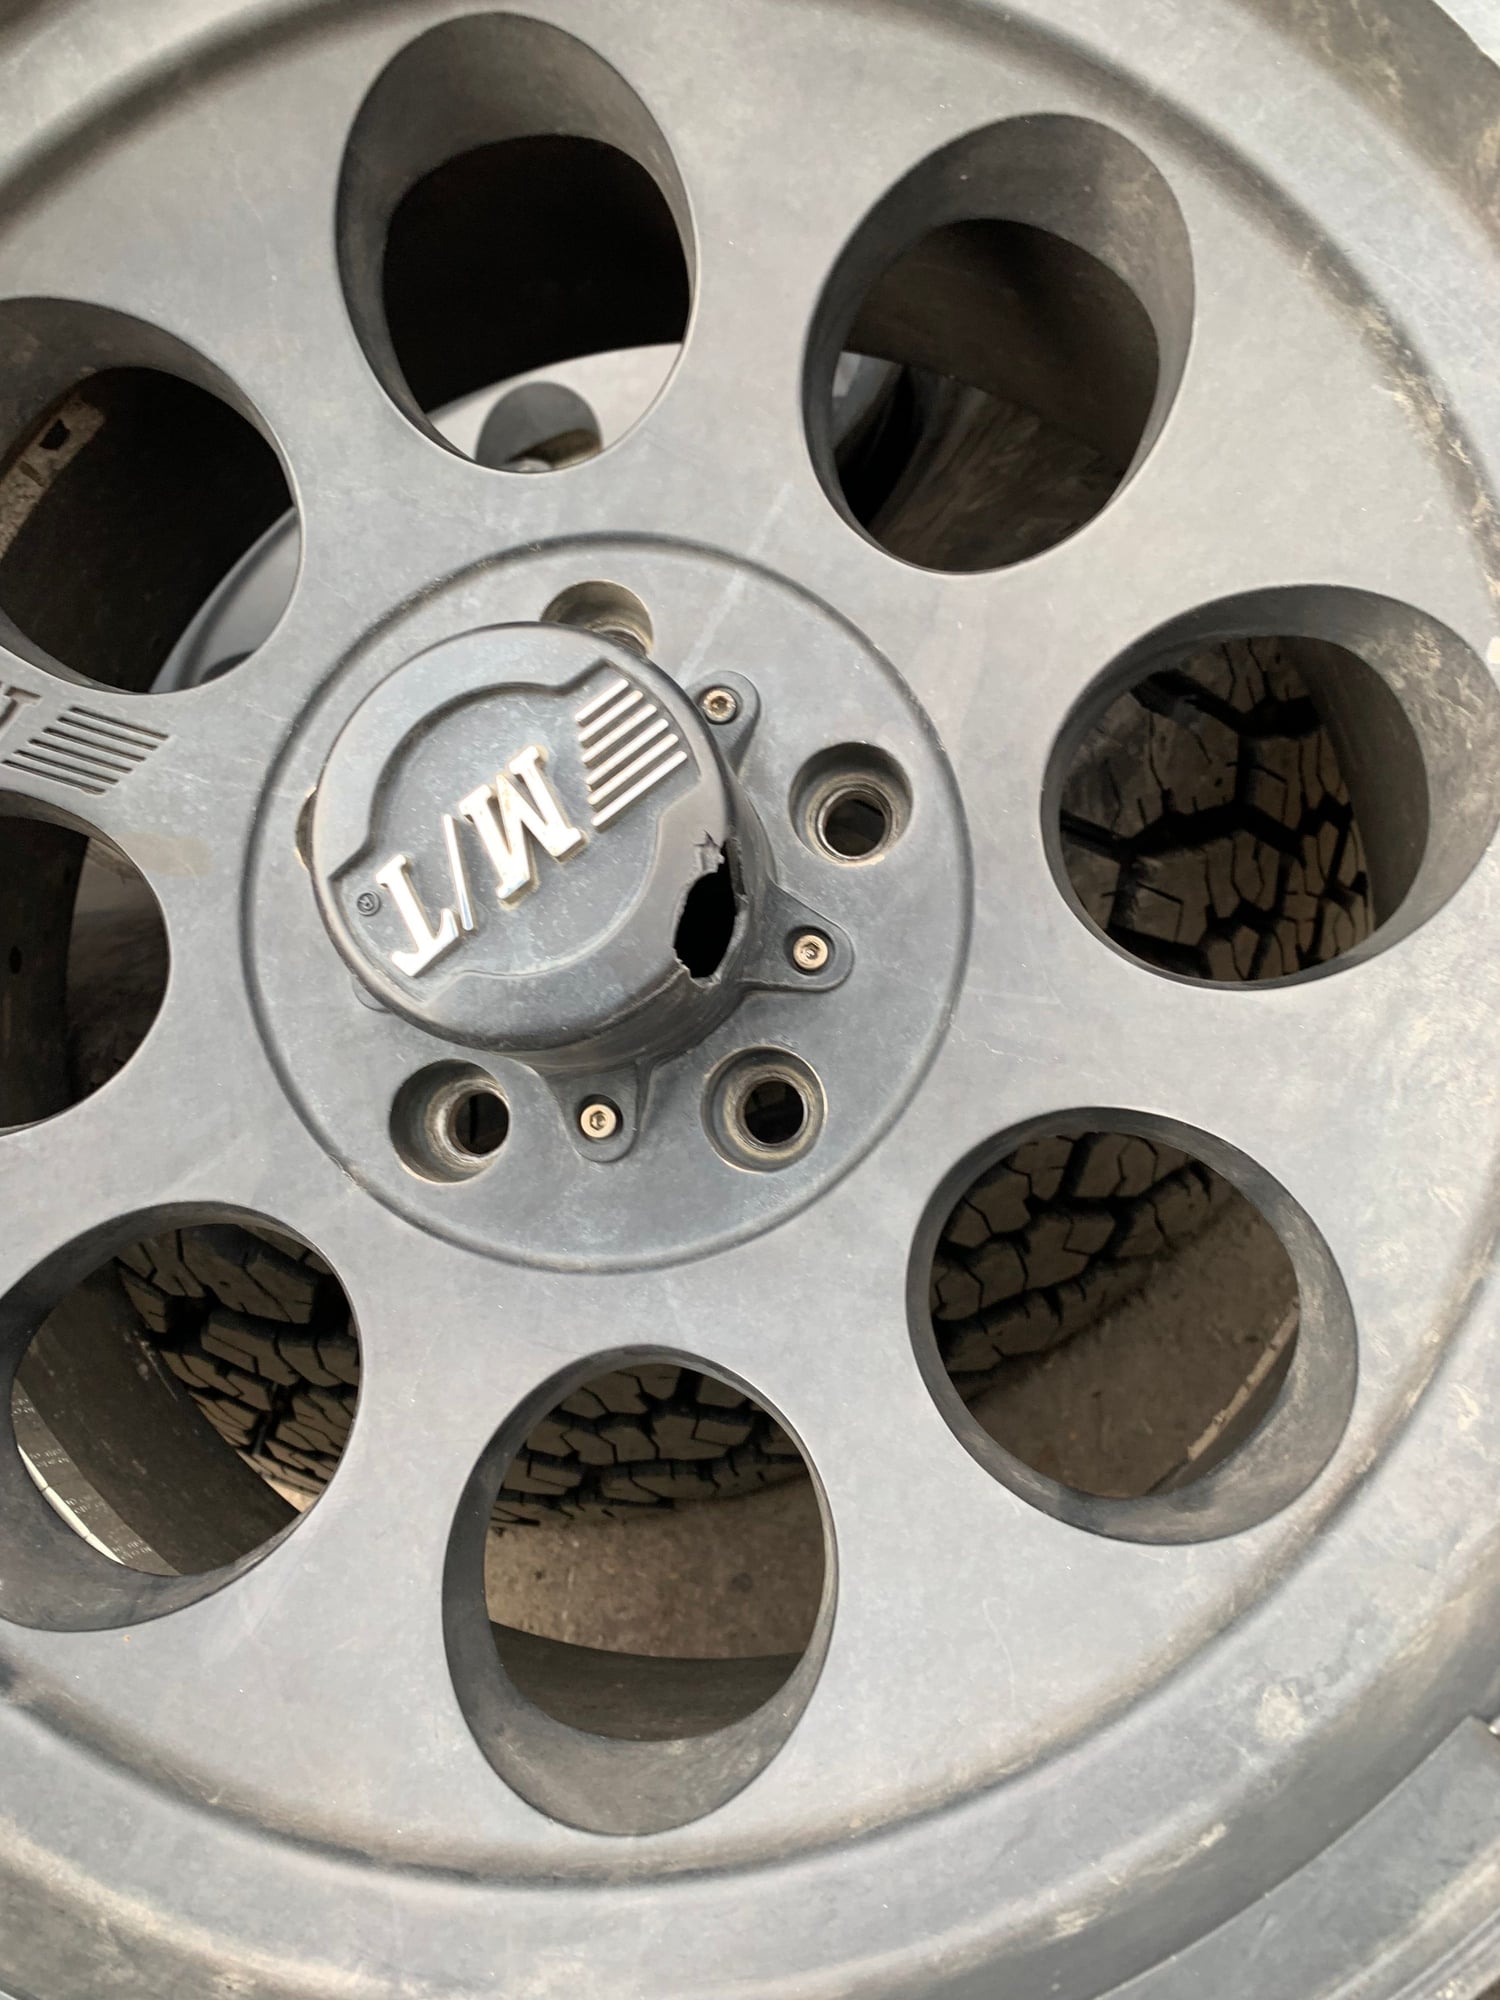 Wheels and Tires/Axles - M/T wheels and 35s general Grabber - Used - 2007 to 2017 Jeep Wrangler - Fernedale, MD 21061, United States